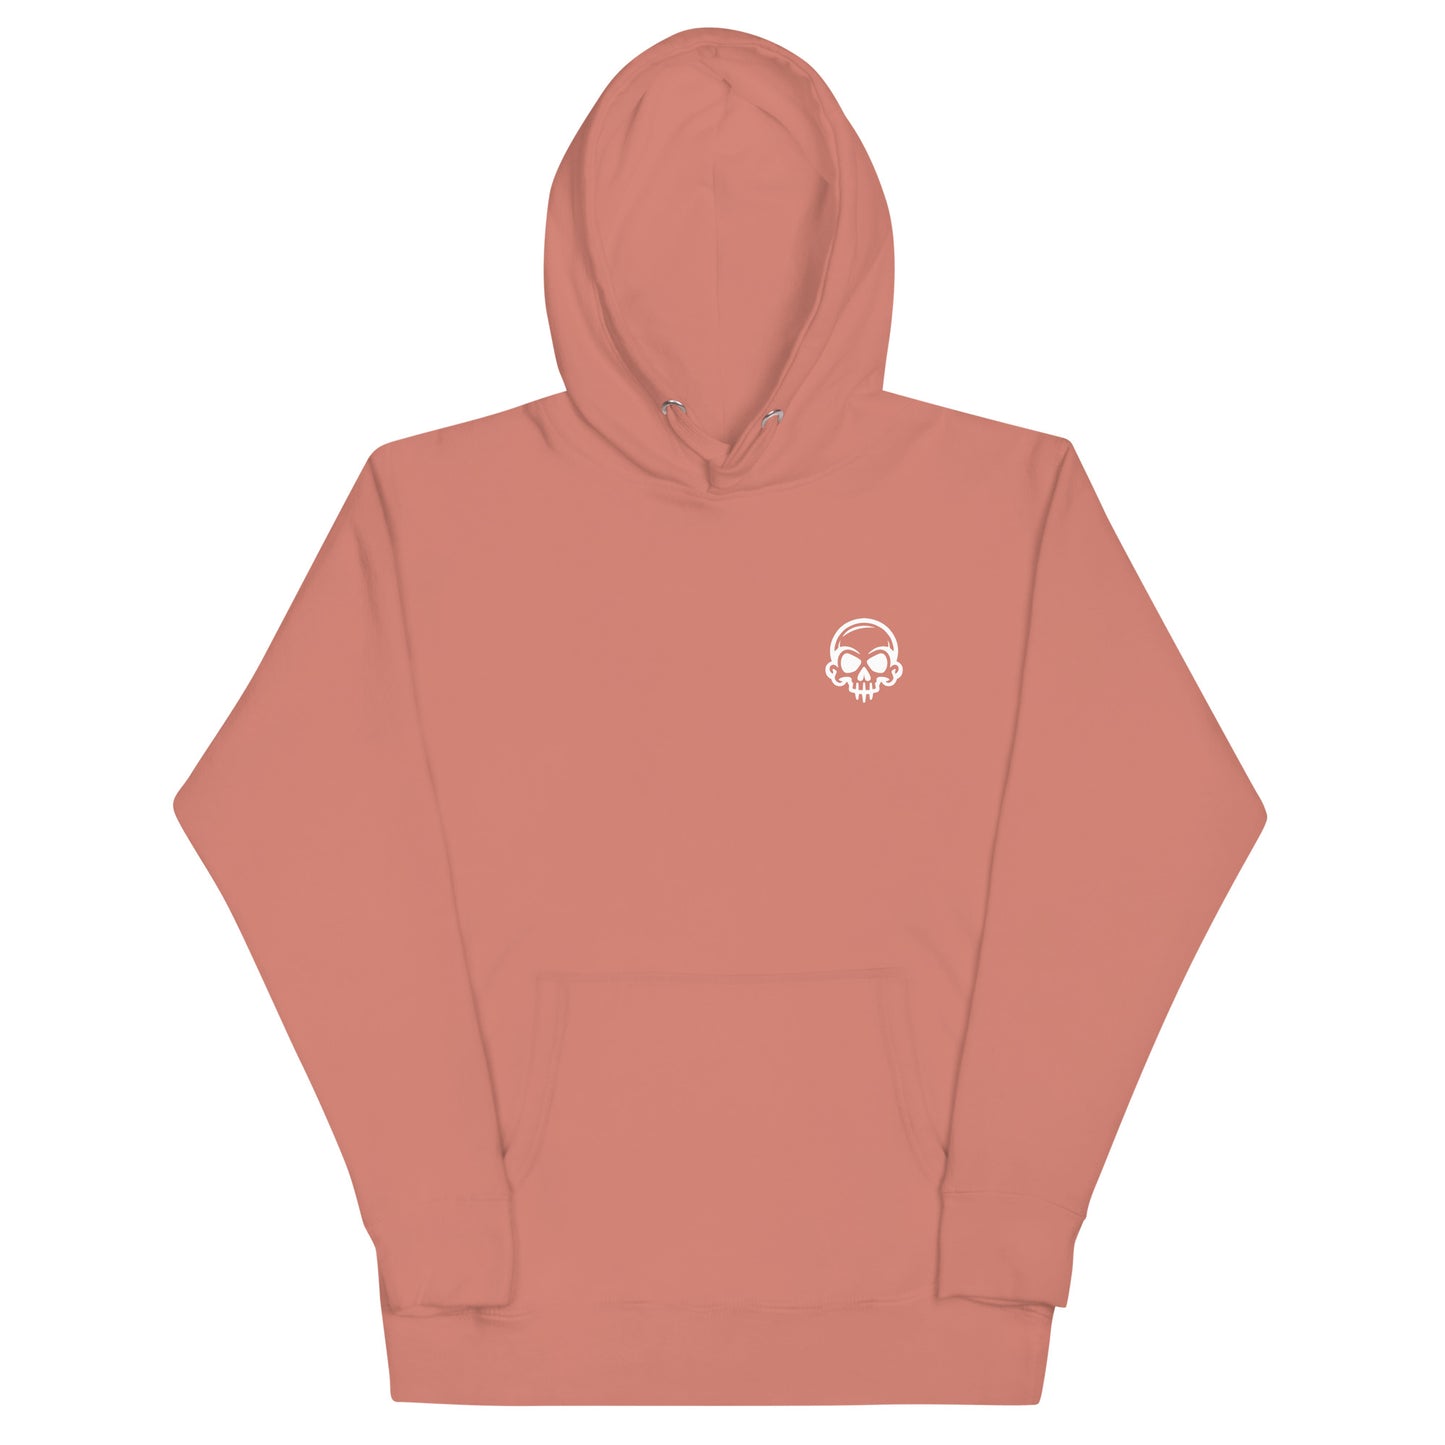 Premium White on Dusty Rose Pullover Hoodie